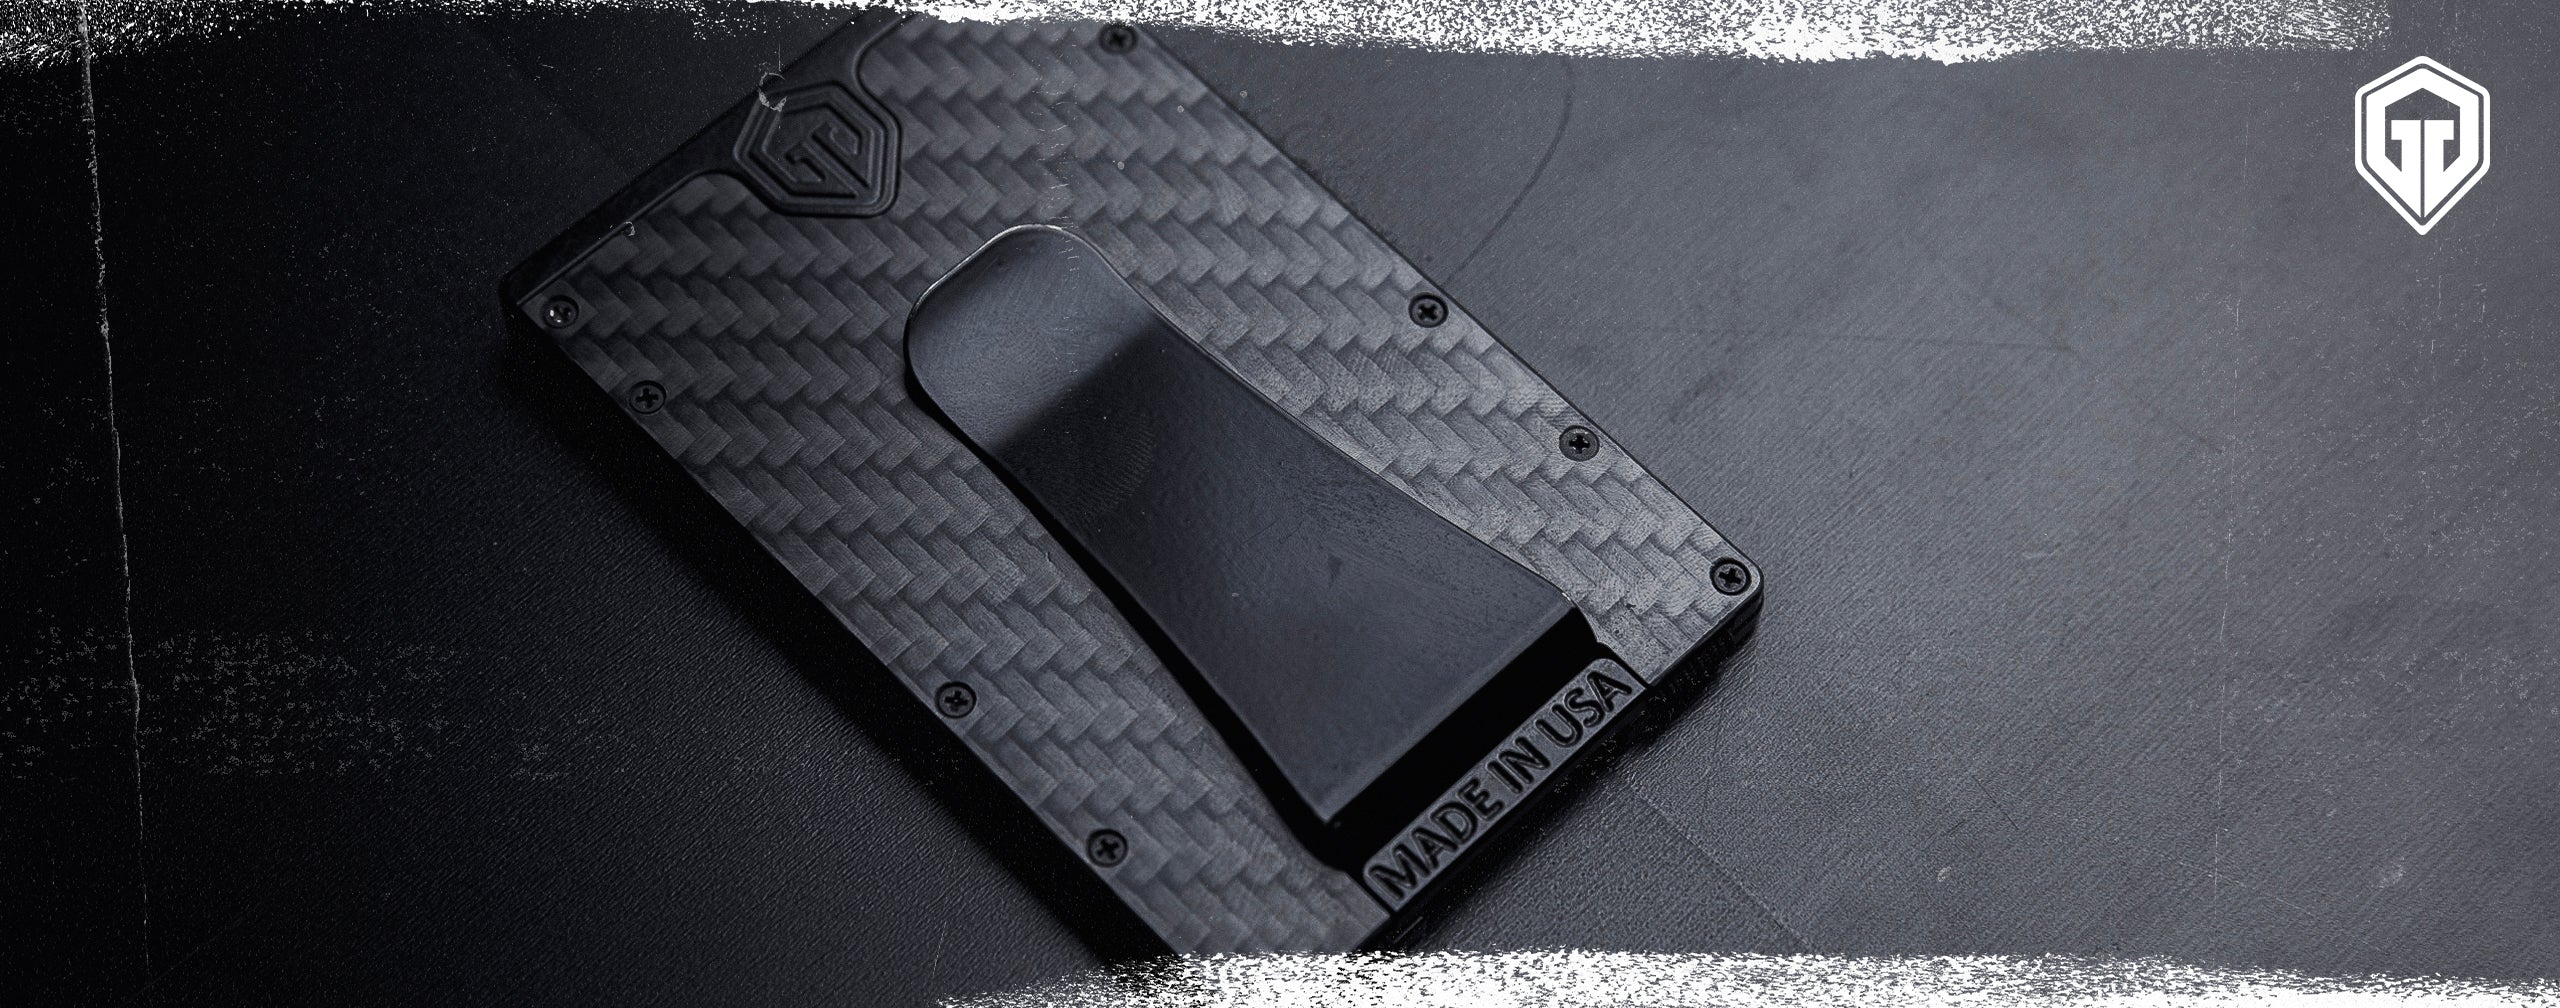 Money Clip on a GeoGrit Wallet